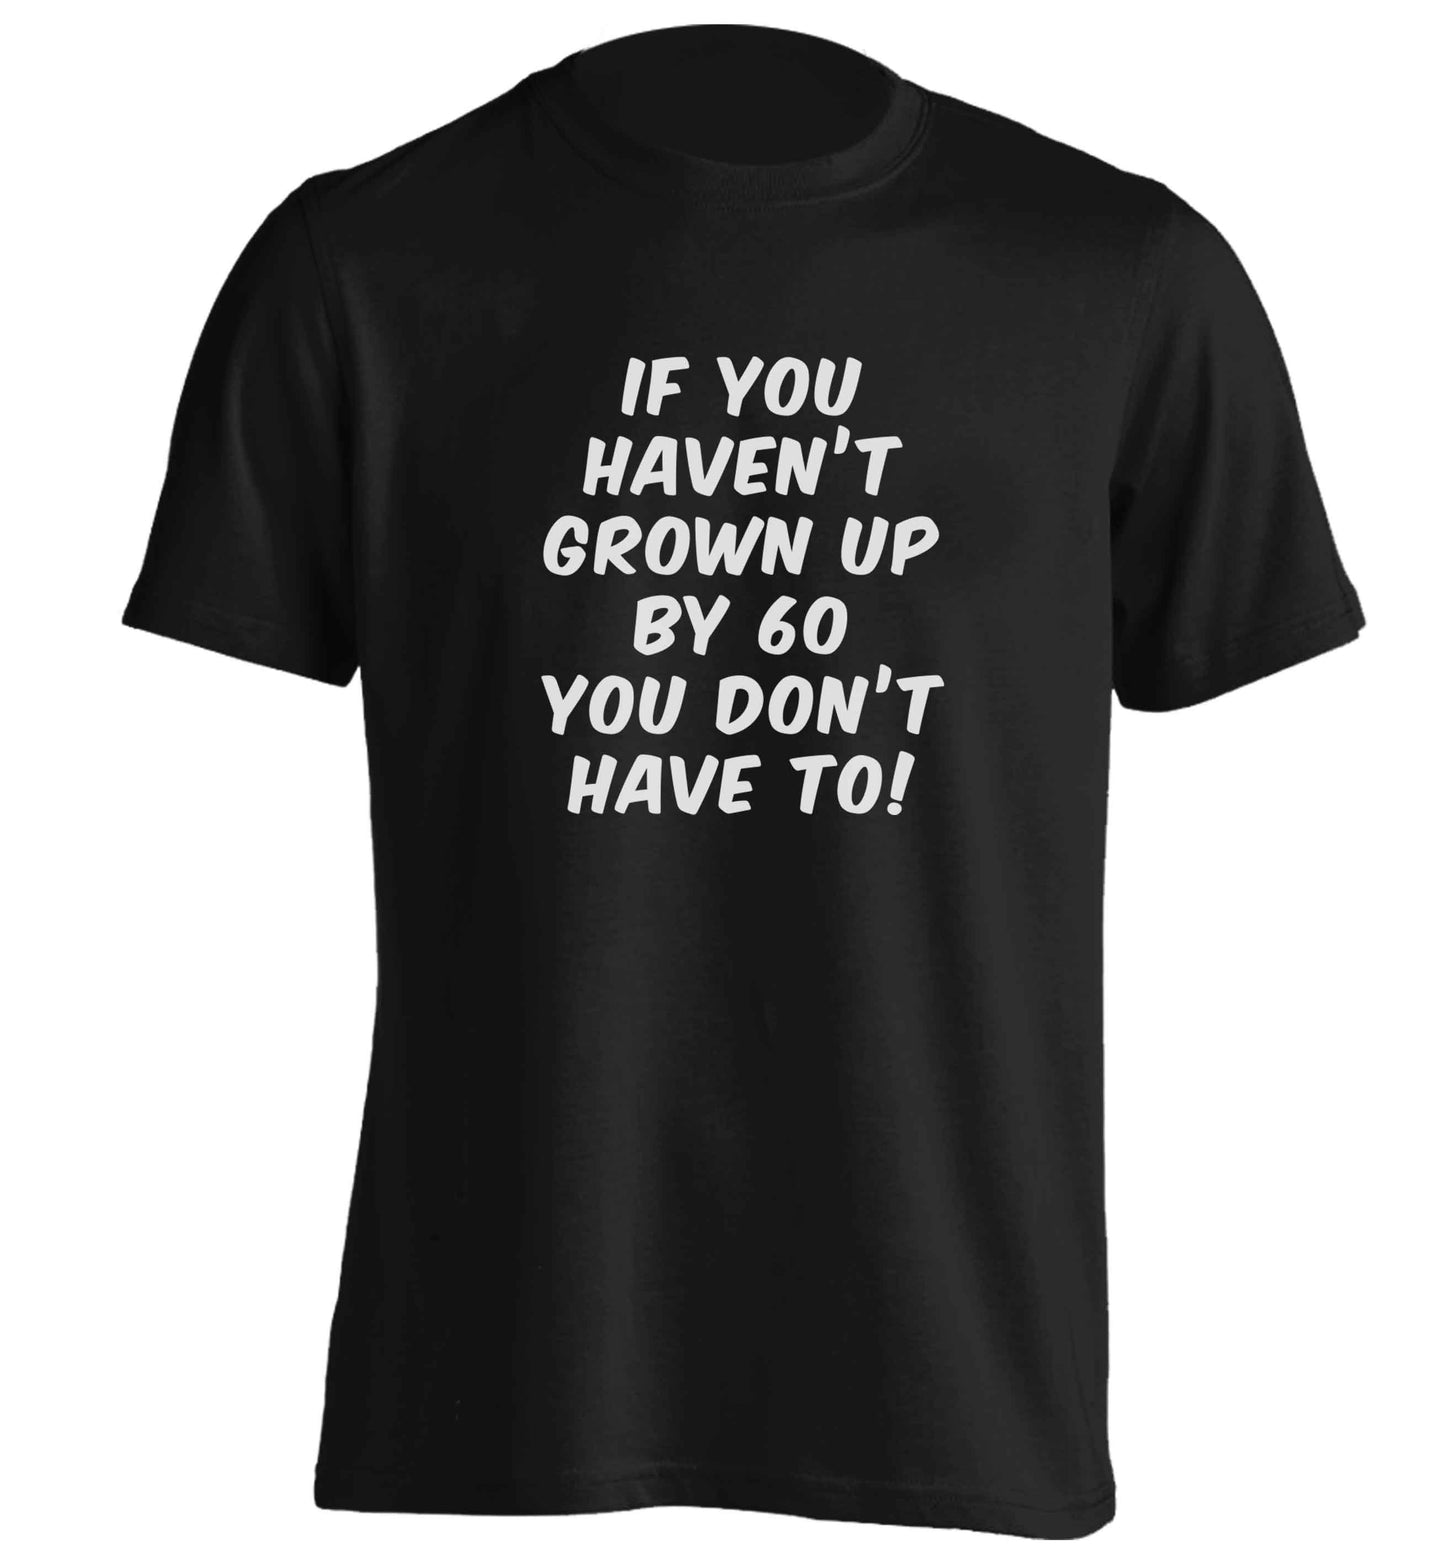 If you haven't grown up by sixty you don't have to adults unisex black Tshirt 2XL